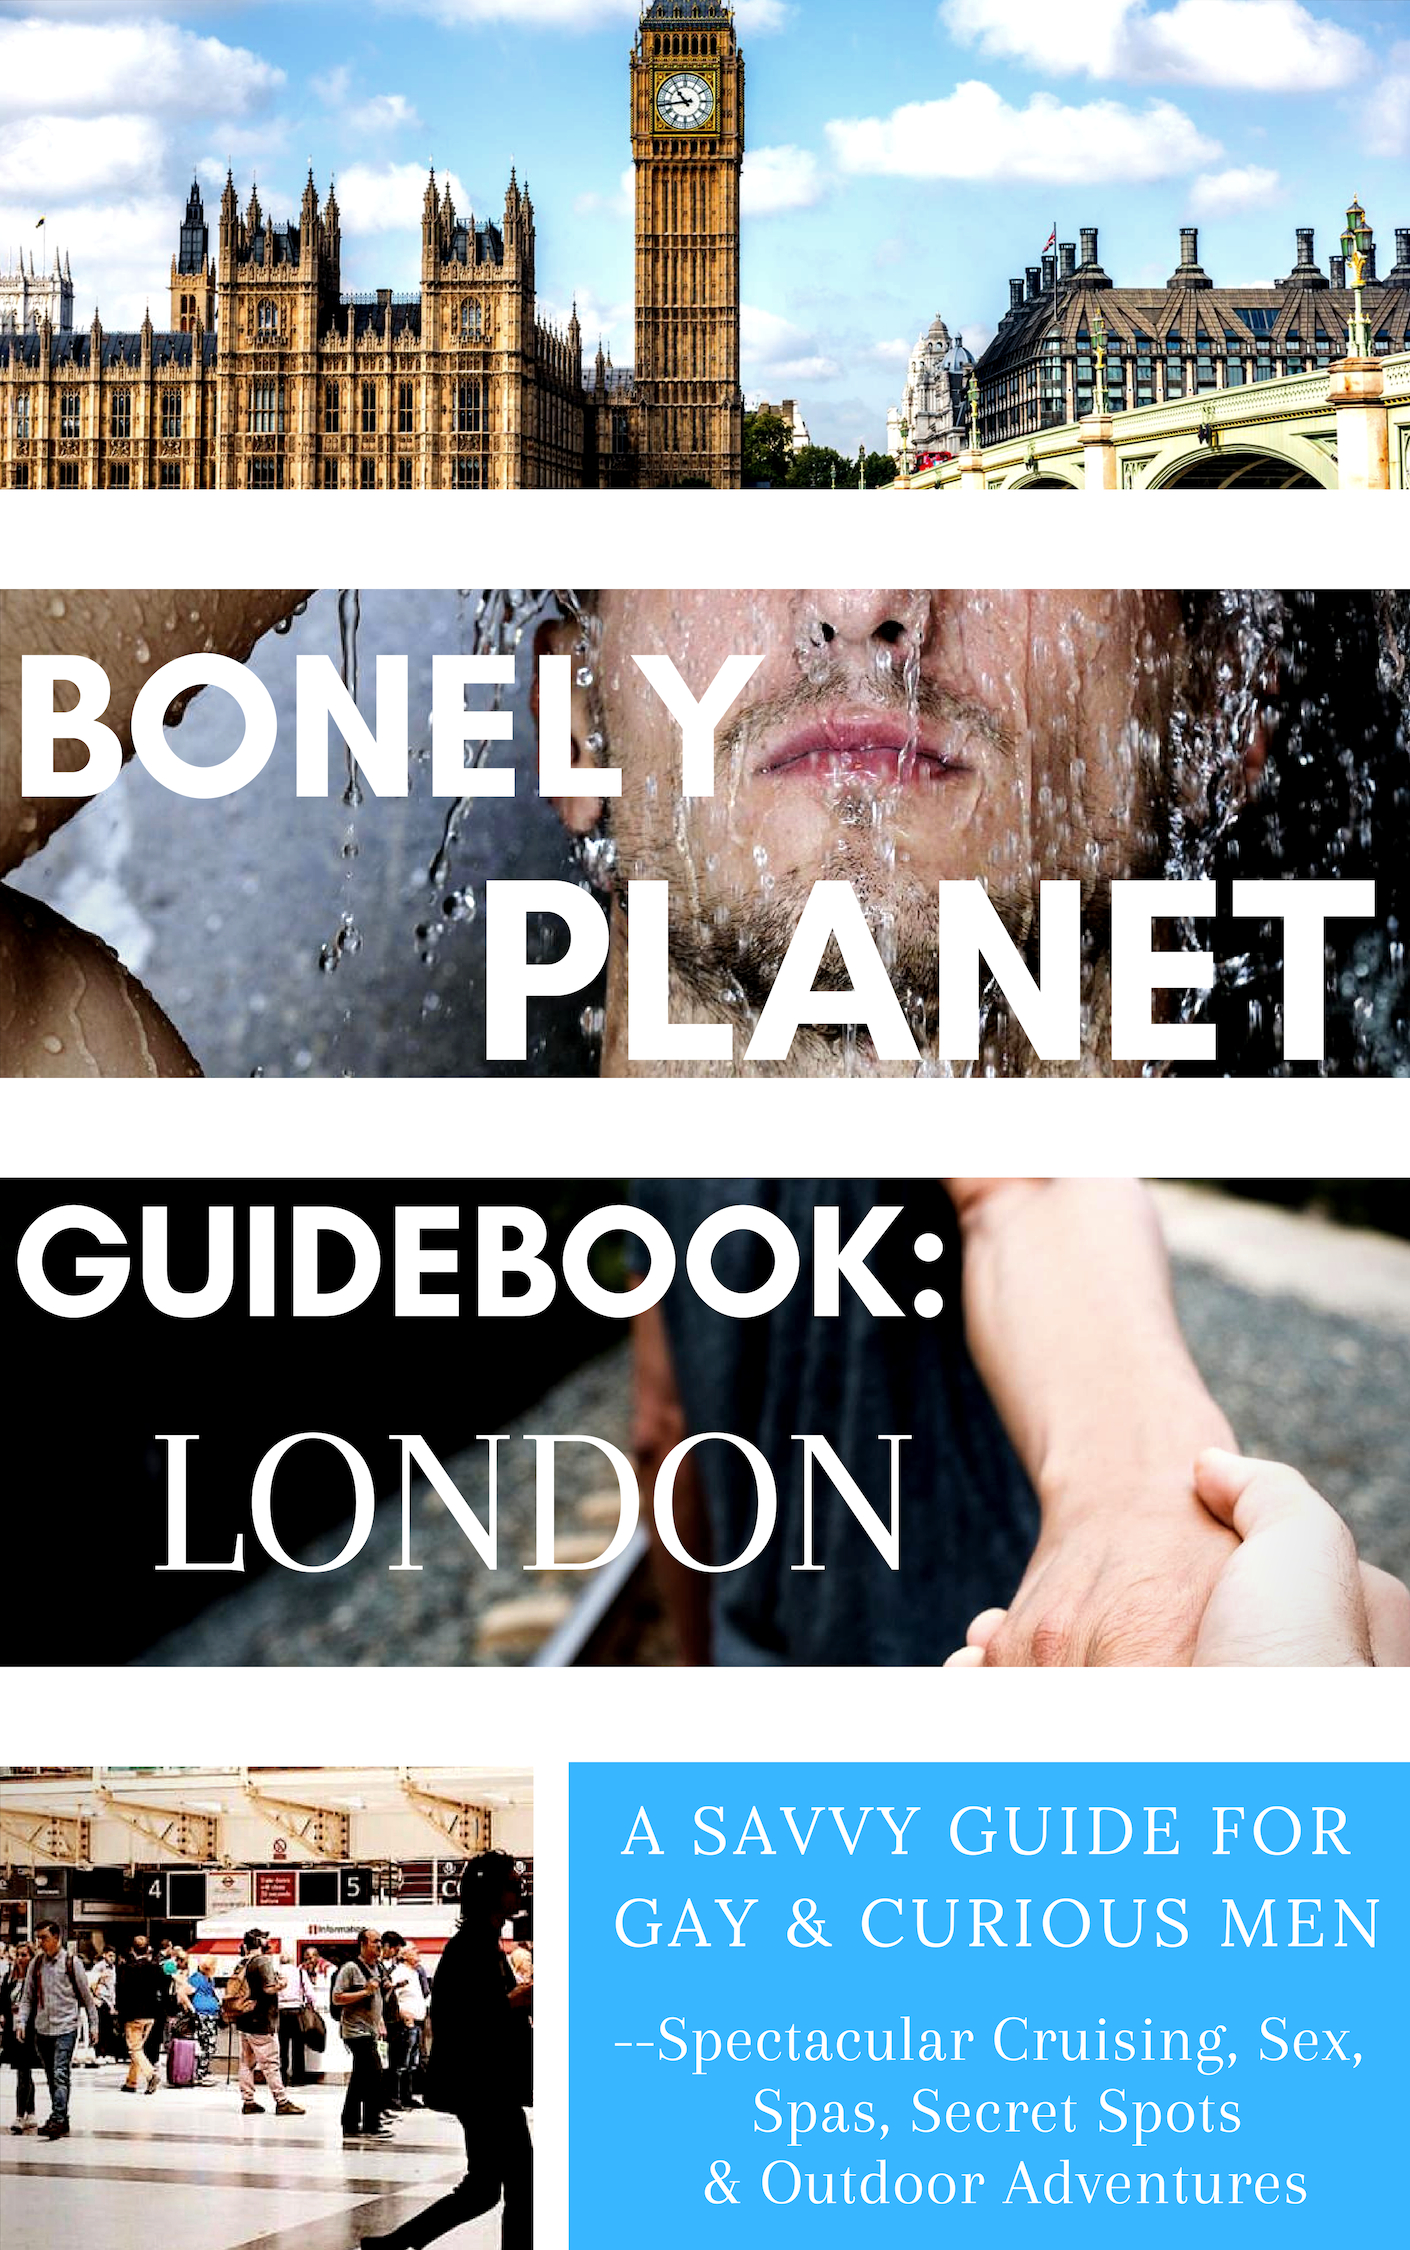 FREE: Bonely Planet Guidebook: London by Jack Cox